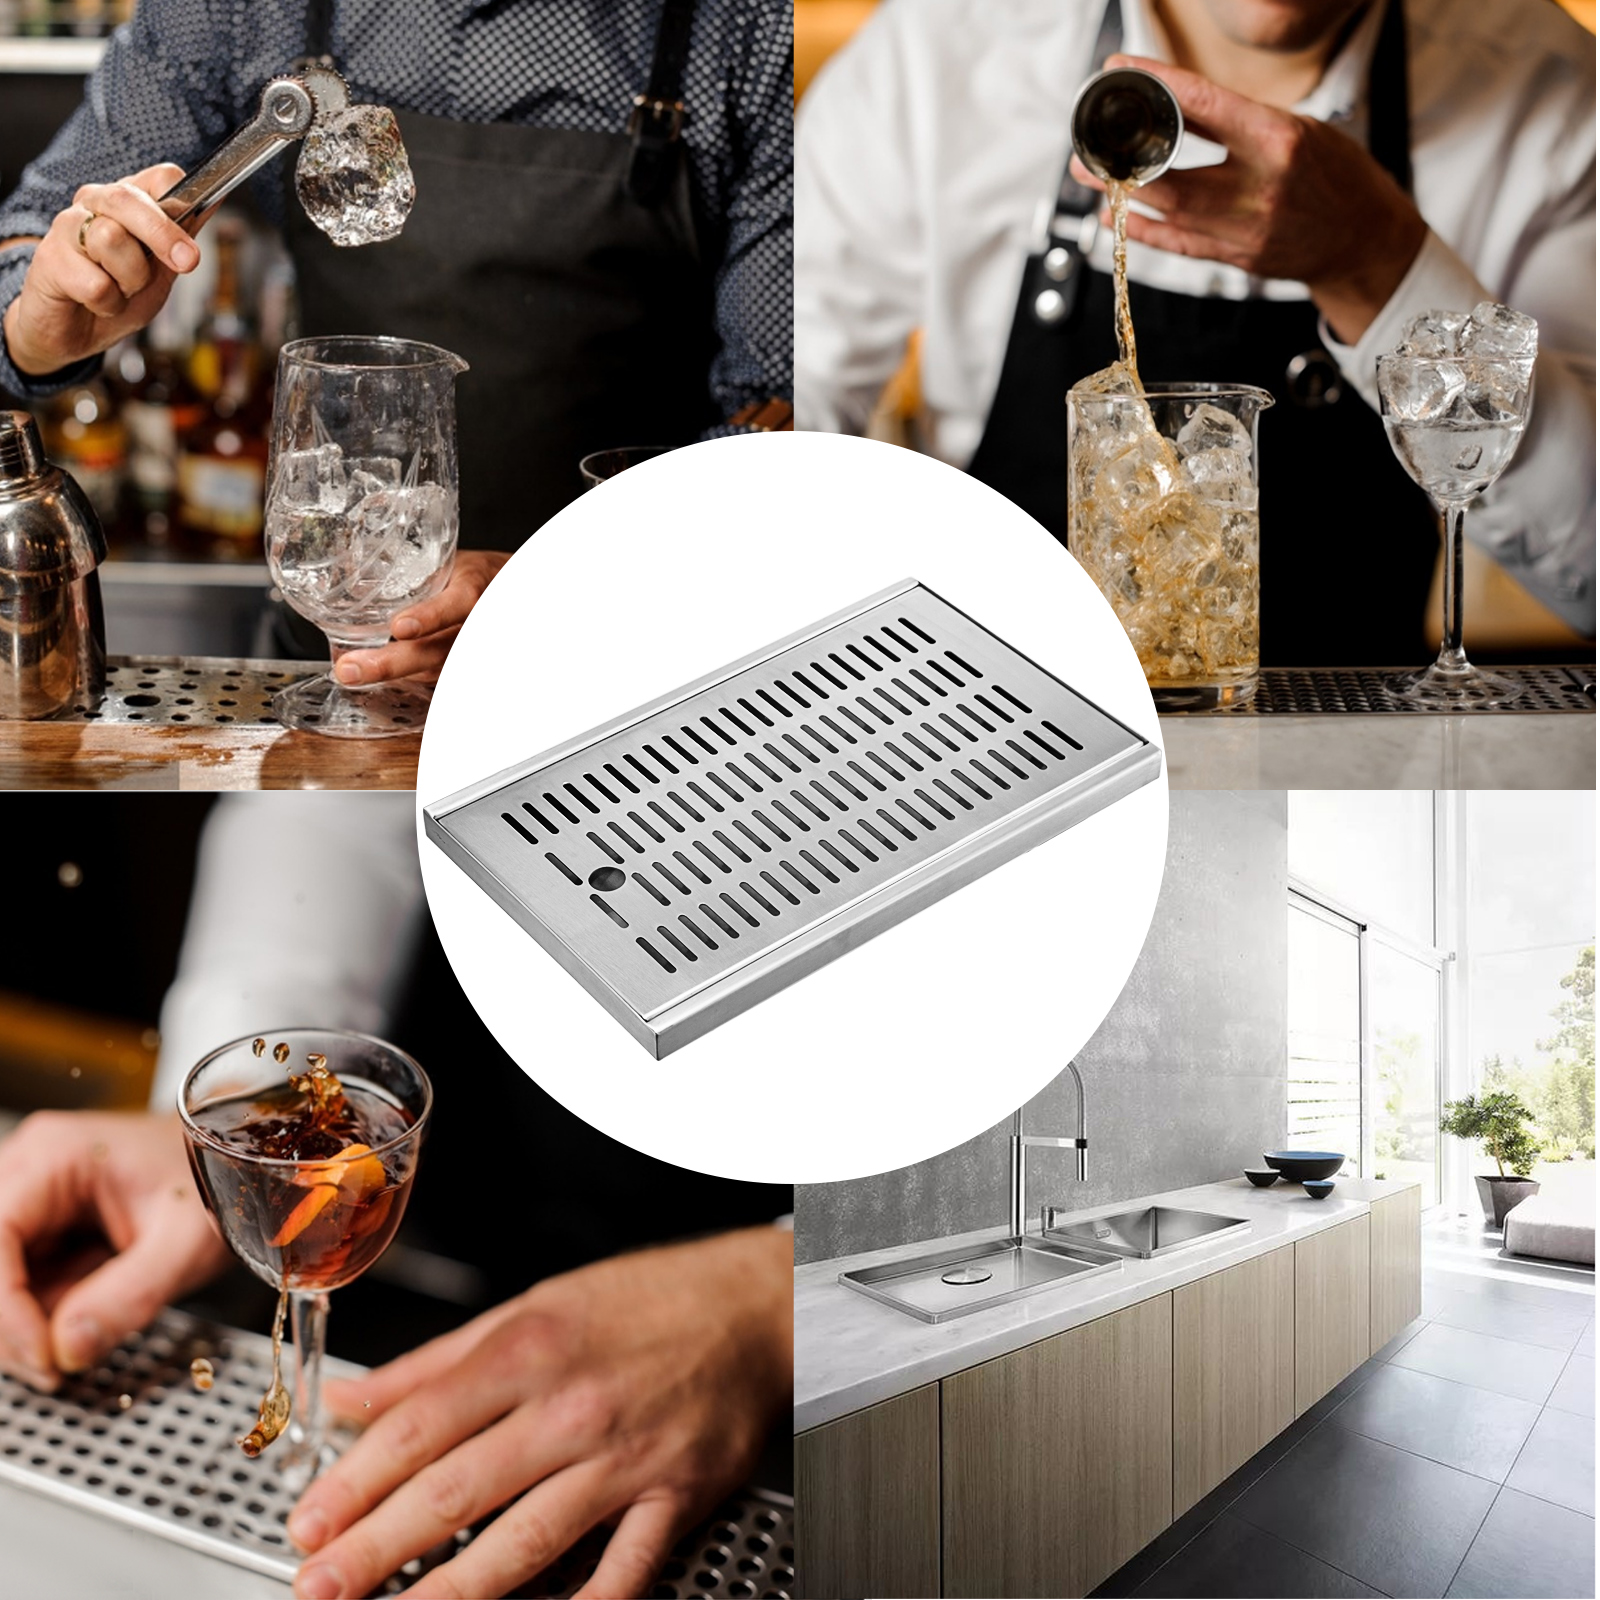 Installation-Free for Home Bar Café Kitchen Non-Slip Beer Drain Tray Stainless Steel Drip Tray Beer Drip Tray No Drain VEVOR Drip Tray 27.5''x12'' Surface Mount Drip Tray Countertop Beer Drip Pan 